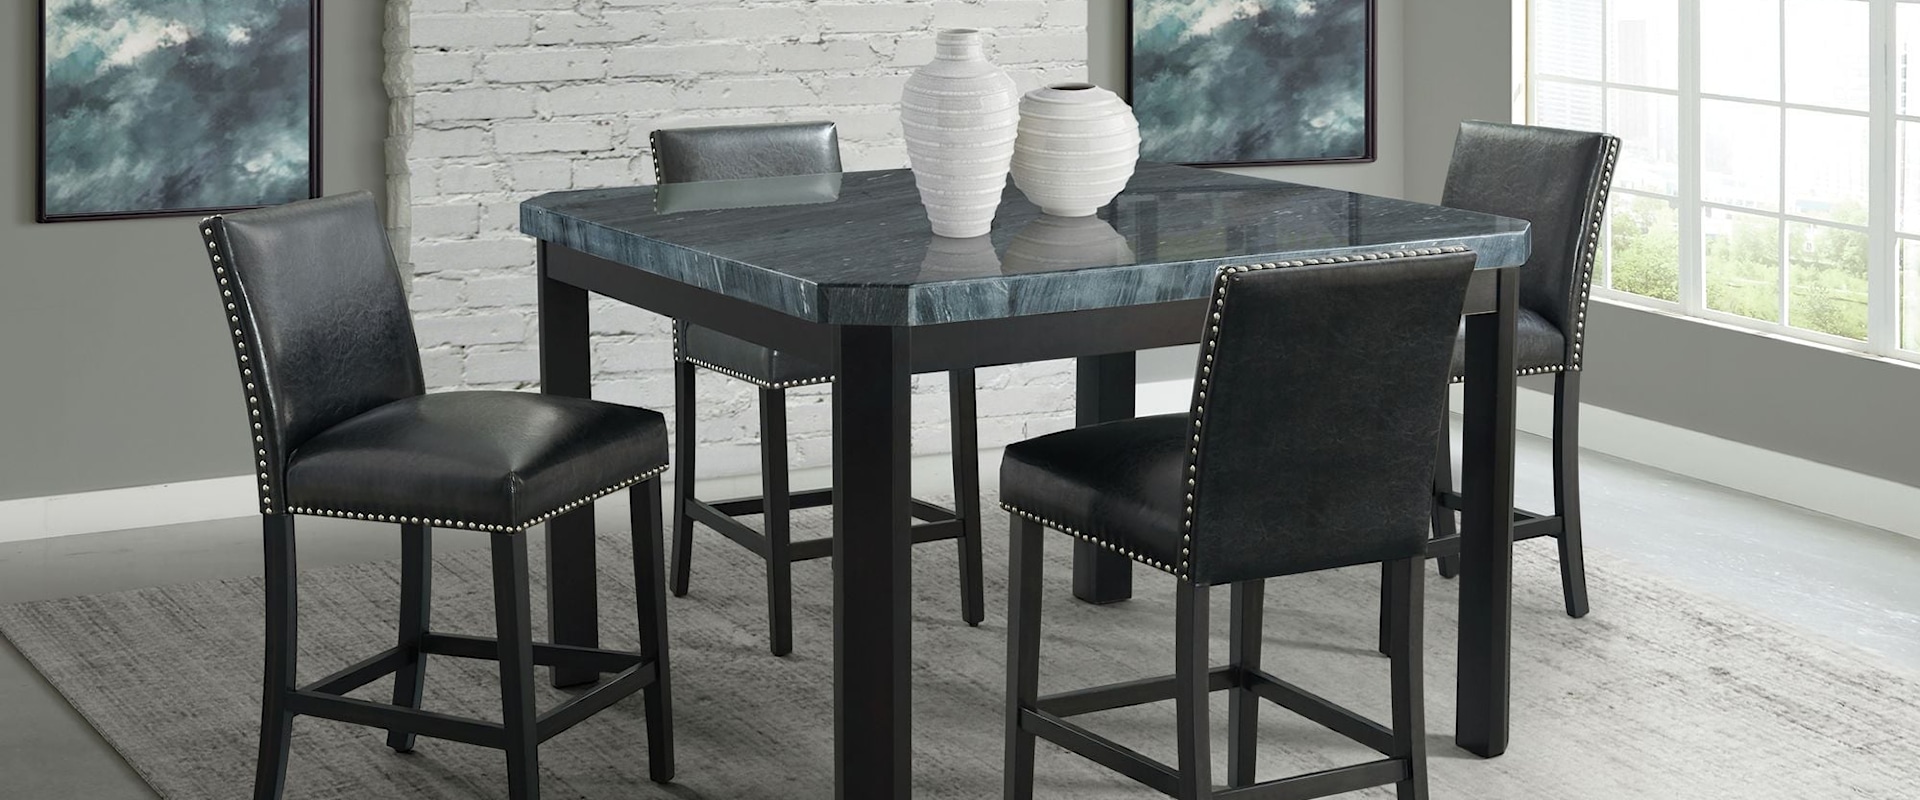 Francesca Square 5PC Counter Height Dining Set-Table & Four Black PU Chairs